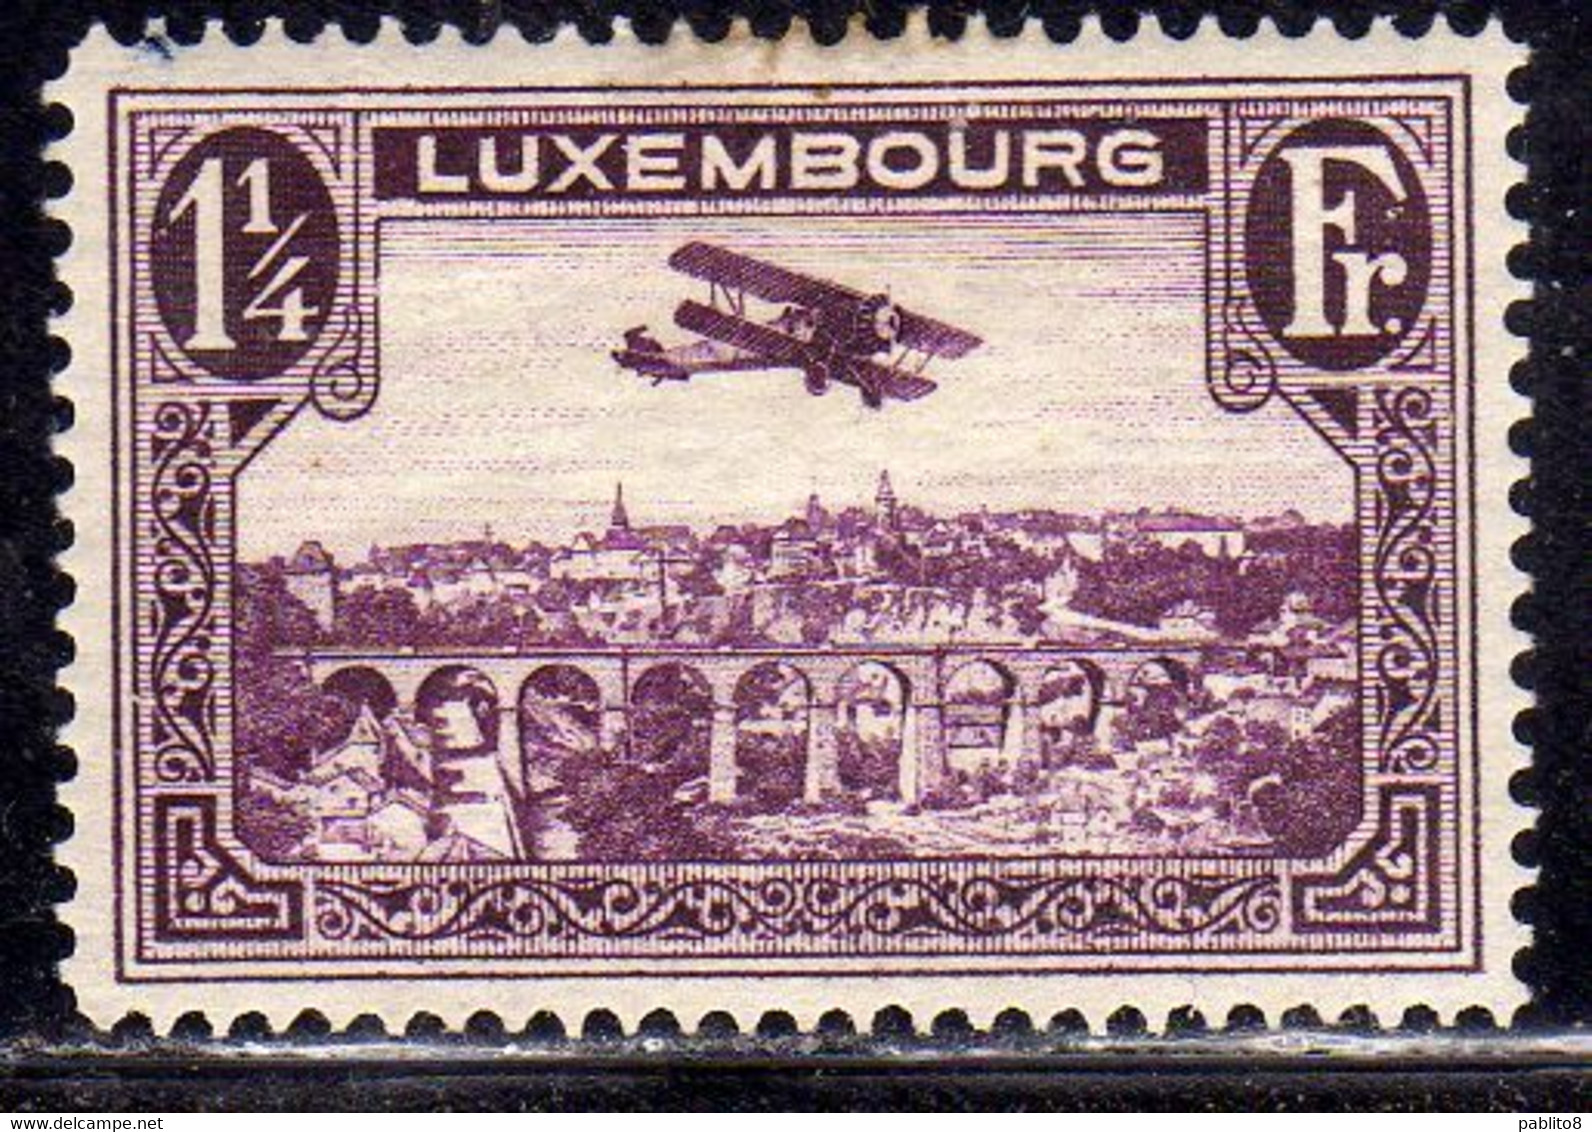 LUXEMBOURG LUSSEMBURGO 1931 1933 AIR POST STAMPS AIRMAIL AIRPLANE OVER POSTA AEREA 1 1/4fr MLH - Neufs